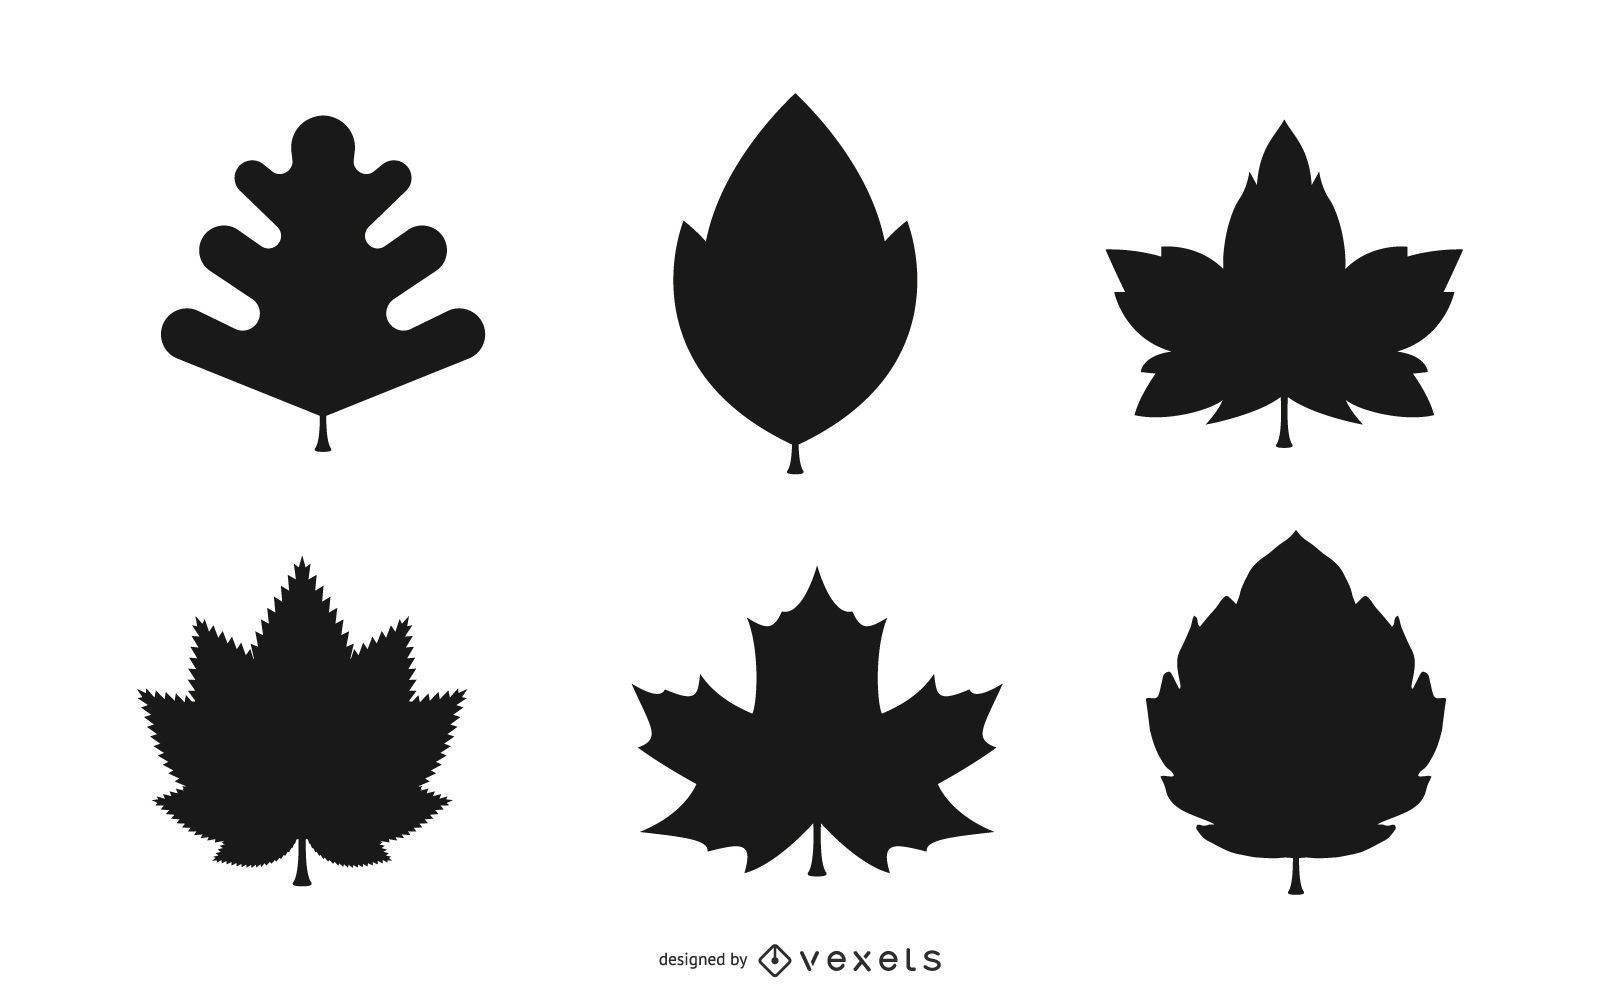 Autumn leaves silhouette set in black